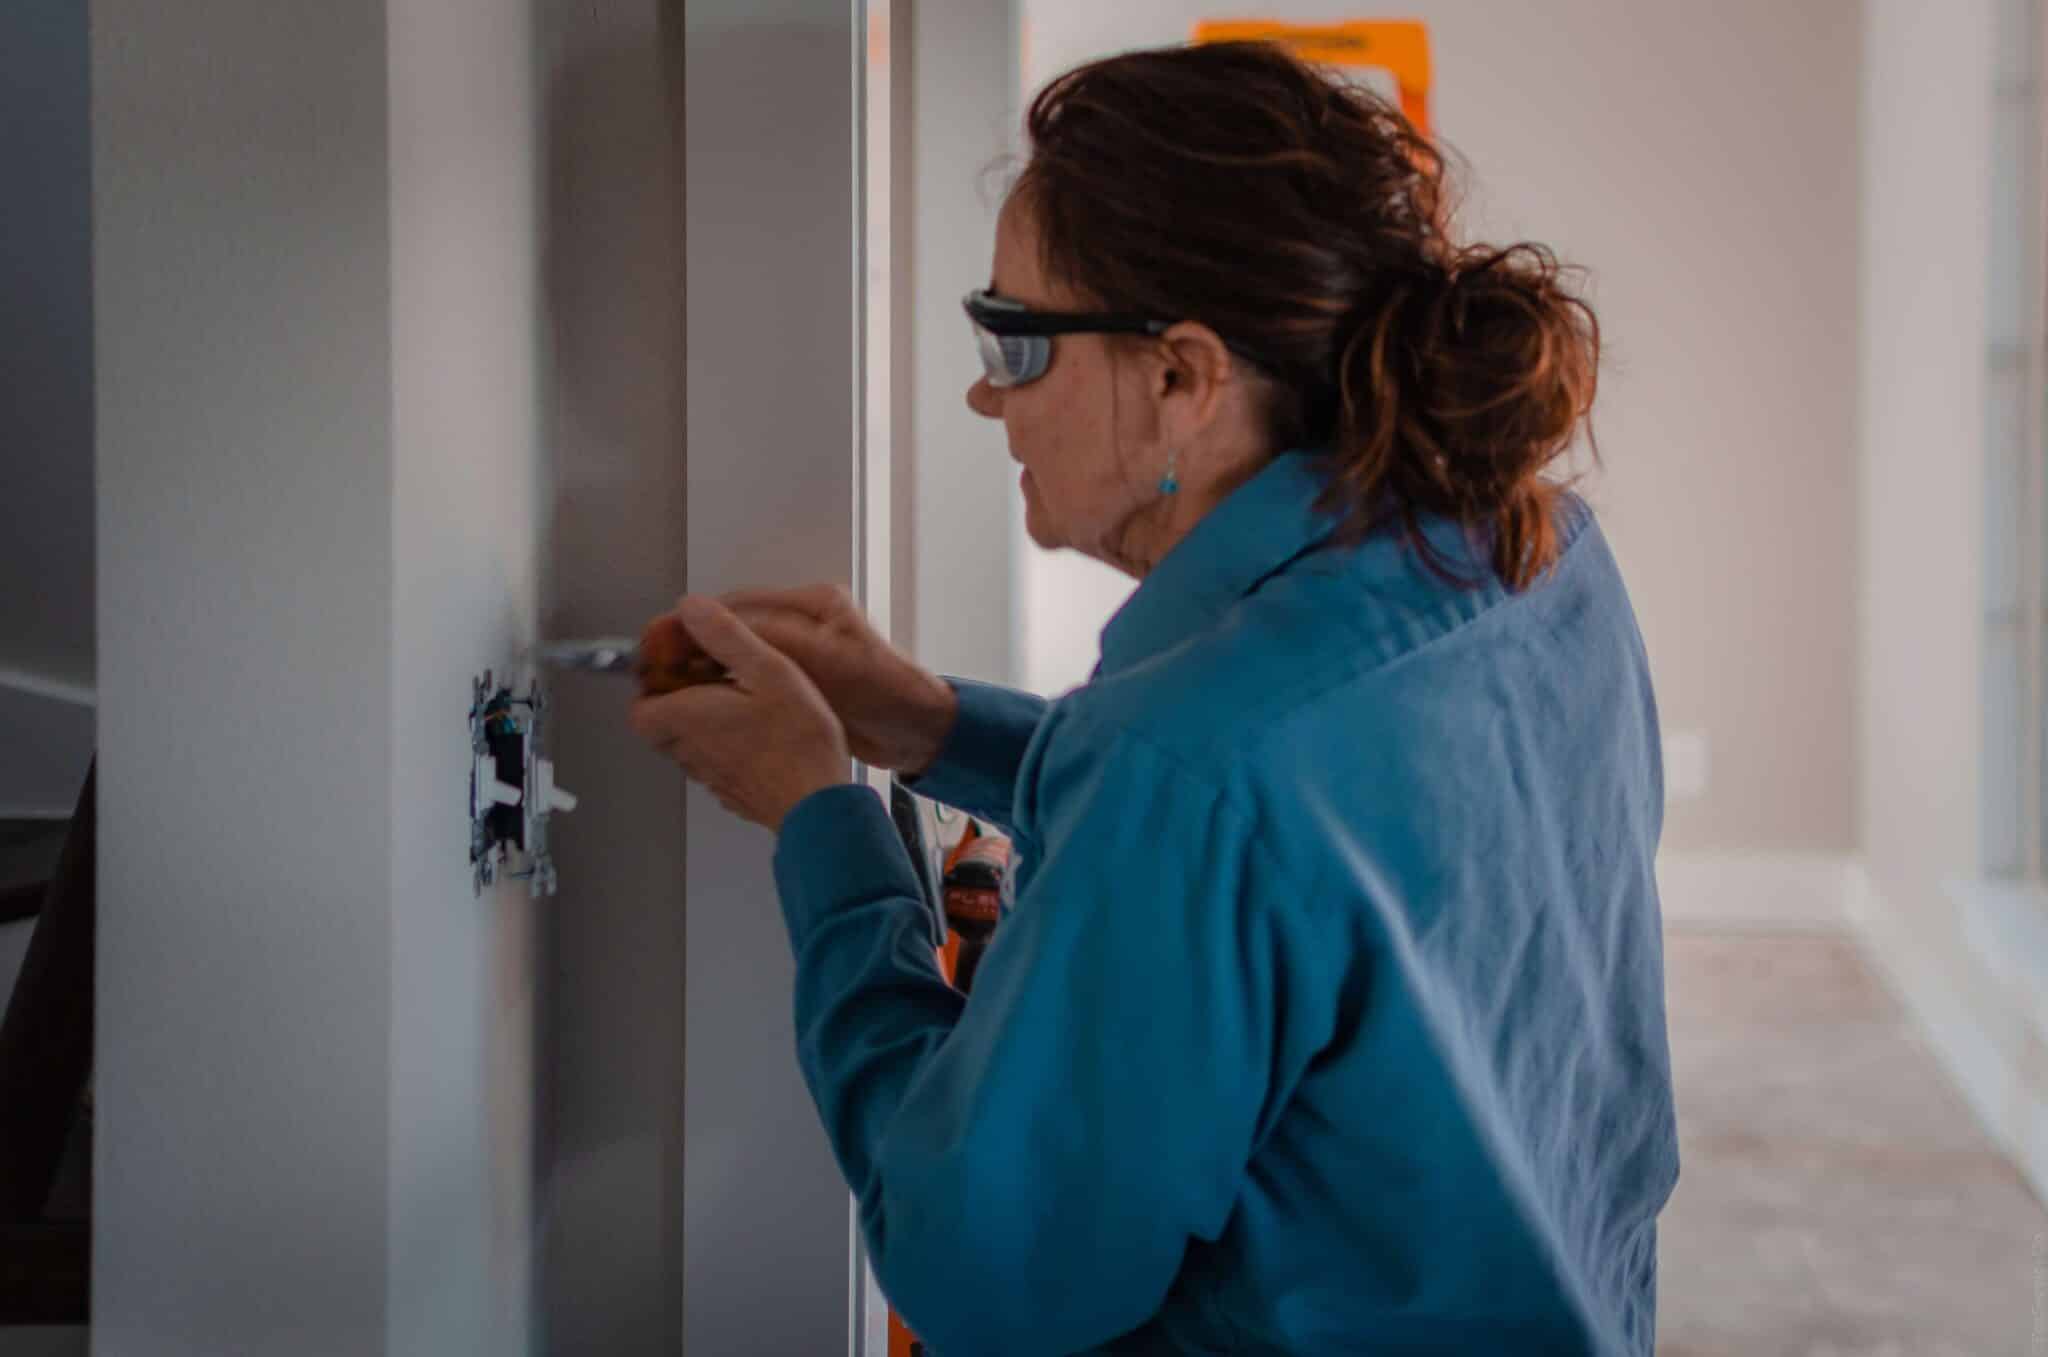 Photo of Deborah an electrician working on an switch on a wall